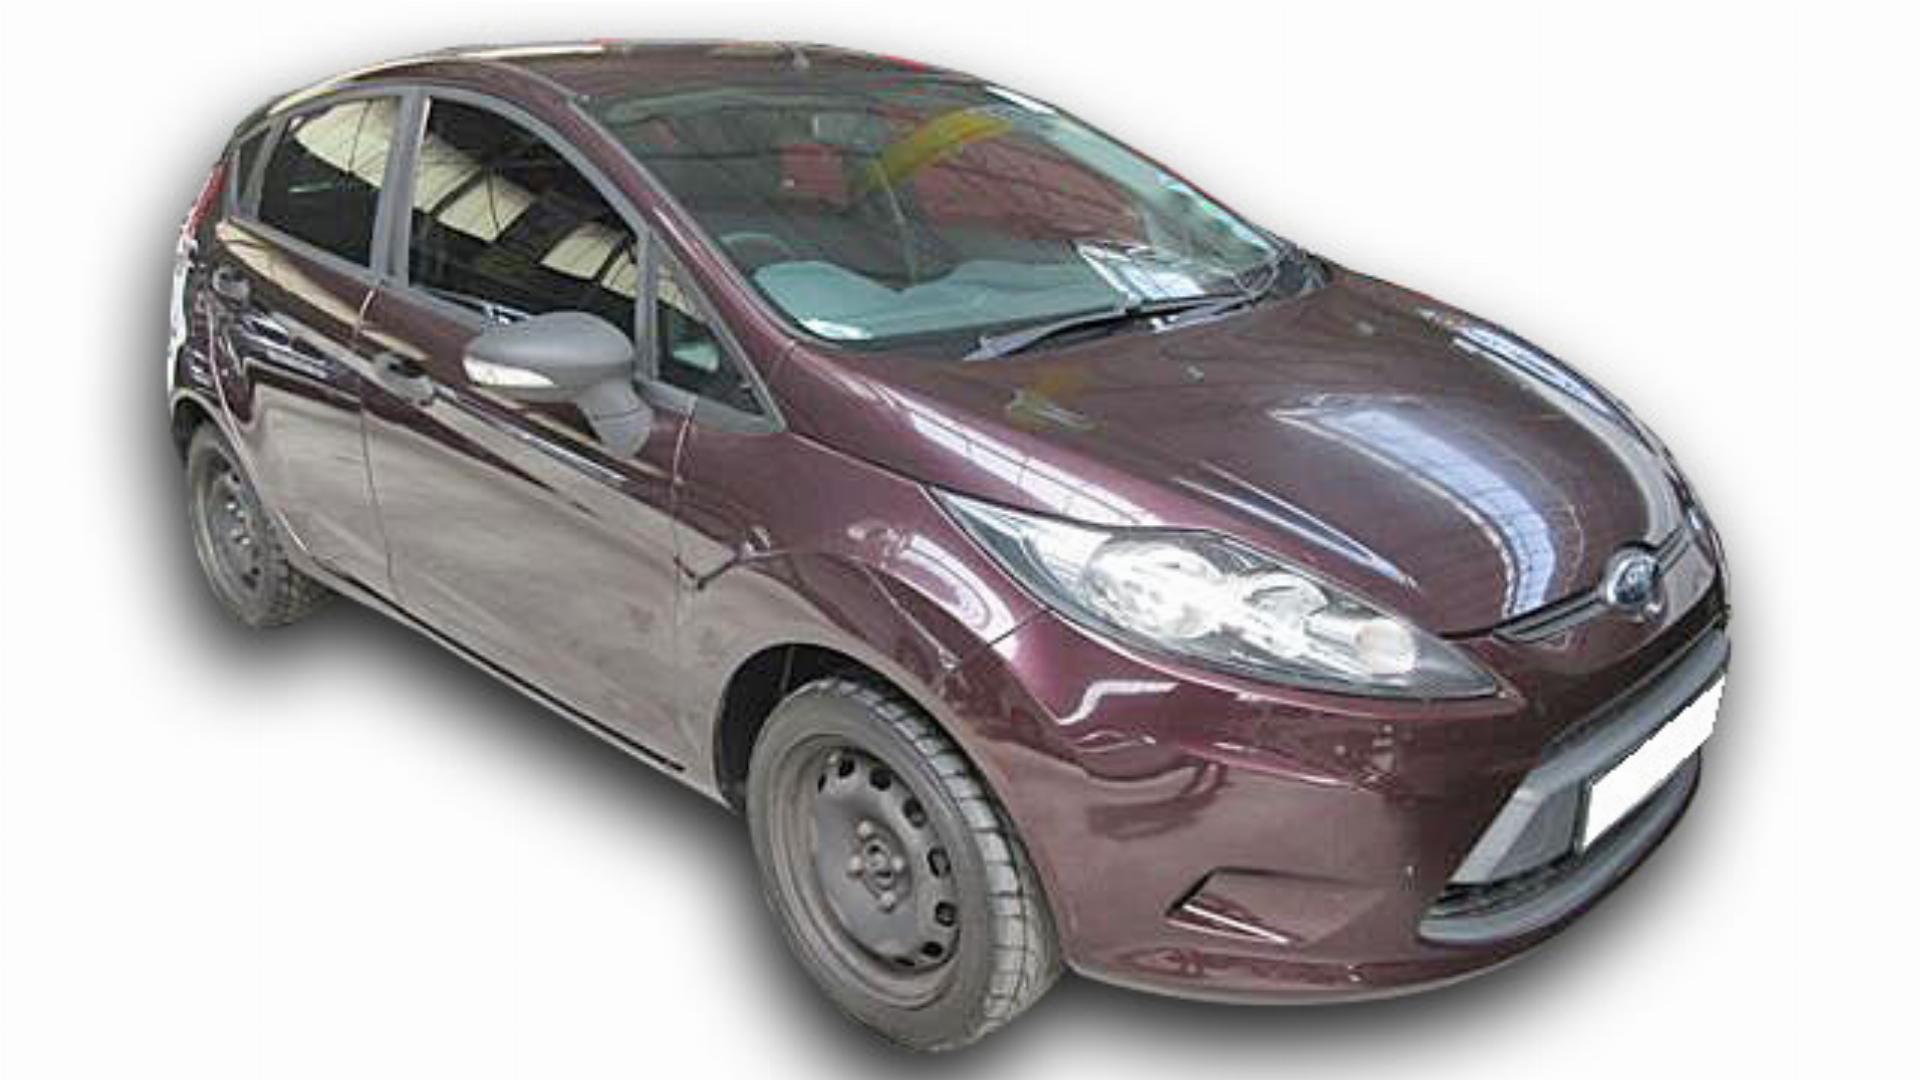 Ford Fiesta 1.4I Ambiente 5 DR